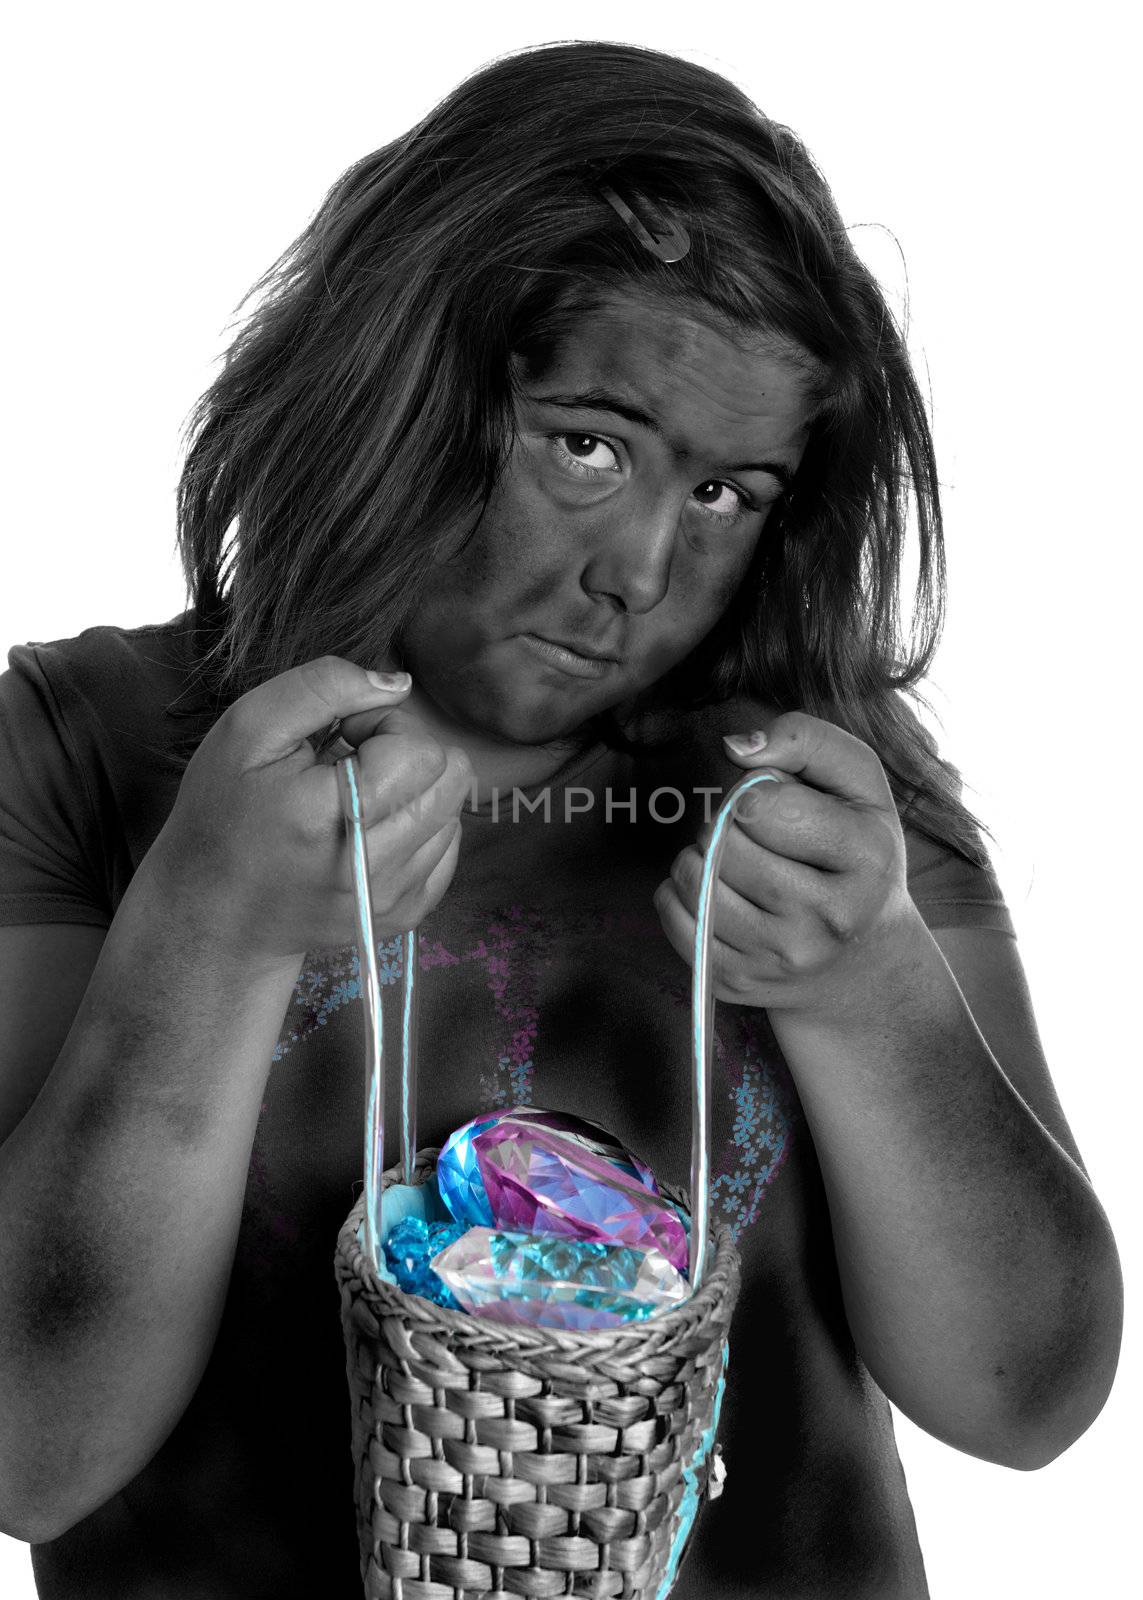 A dirty child is holding a bag of jewels, isolated against a white background.